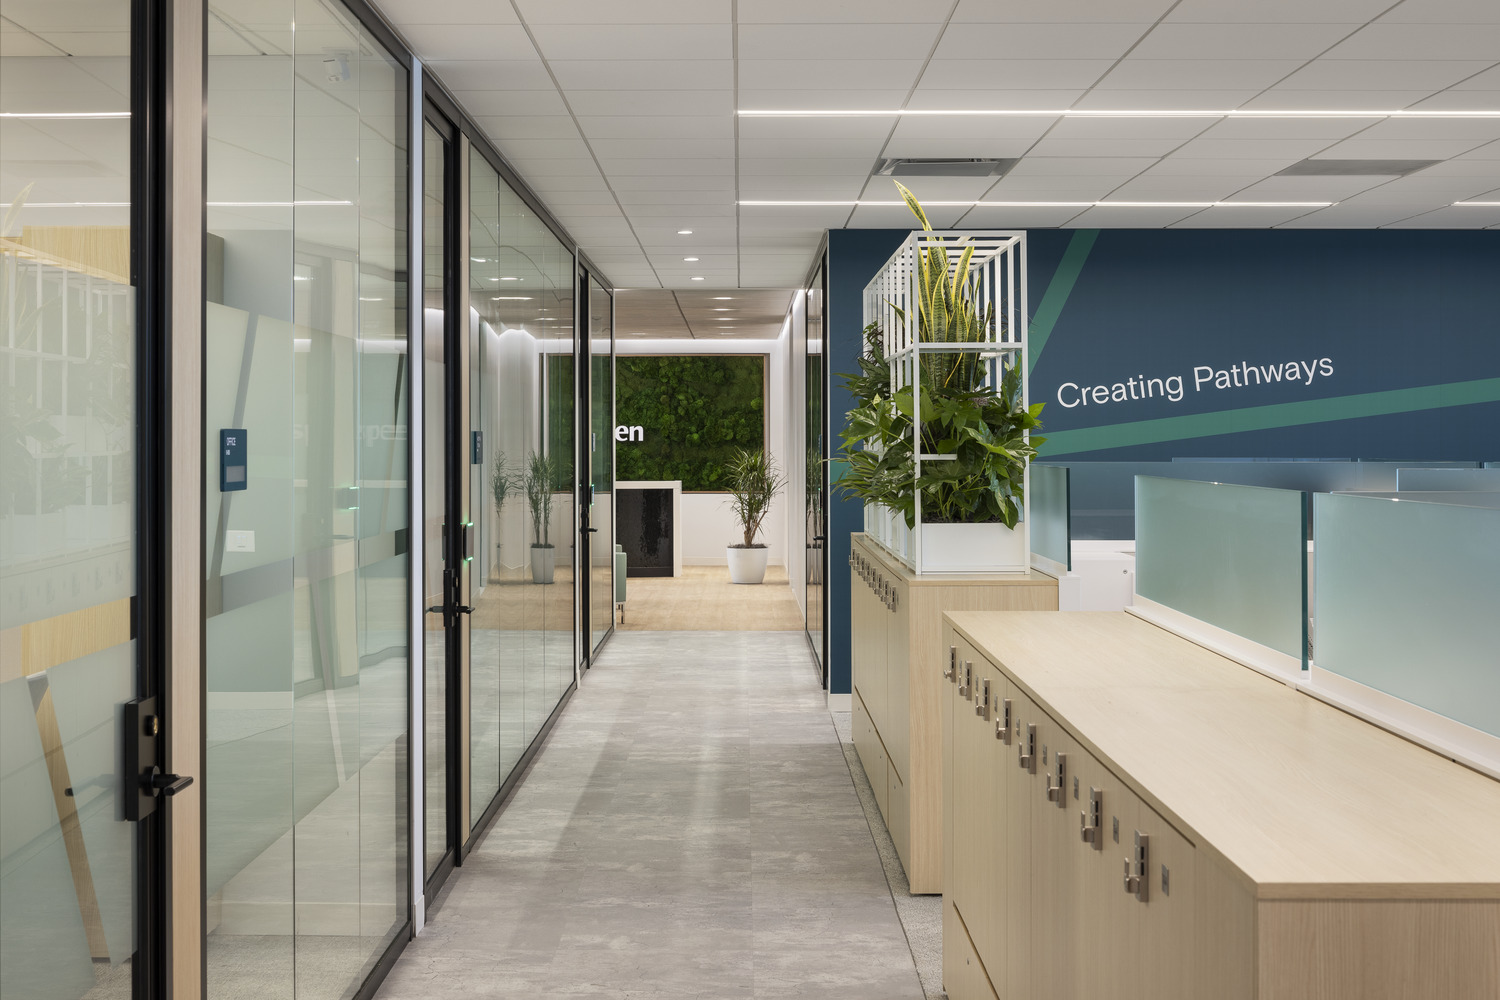 The interior of a modern office corridor illuminated by clean, linear lighting. The floor is tiled with large, gray slabs that lead past wood-trimmed glass walls, focusing on transparent and natural elements. Lush greenery adorns several areas, with large potted plants on minimalist white cabinets. The wall is boldly marked with "Creating Pathways" in a modern font, set against a deep teal backdrop, enhancing the environment's contemporary and welcoming aesthetic.